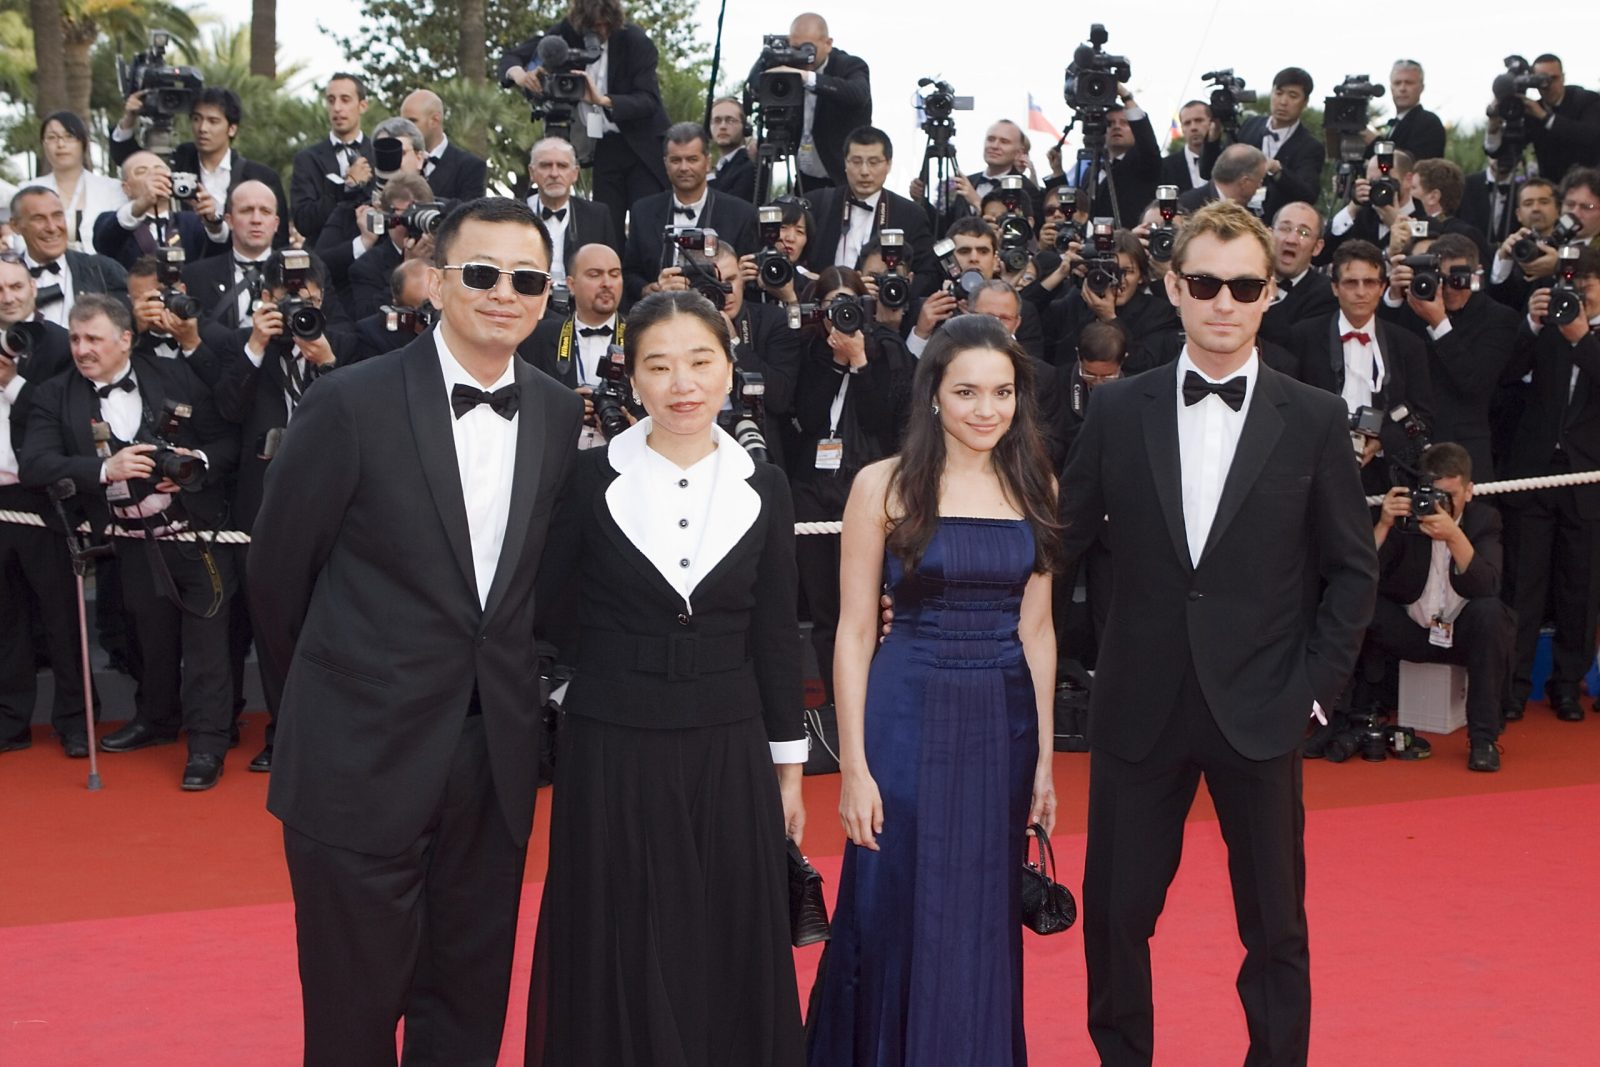 Wong Kar-wai with wife Chan Ye-cheng and the lead cast of My Blueberry Nights (Norah Jones and Jude Law) at the Cannes Premiere